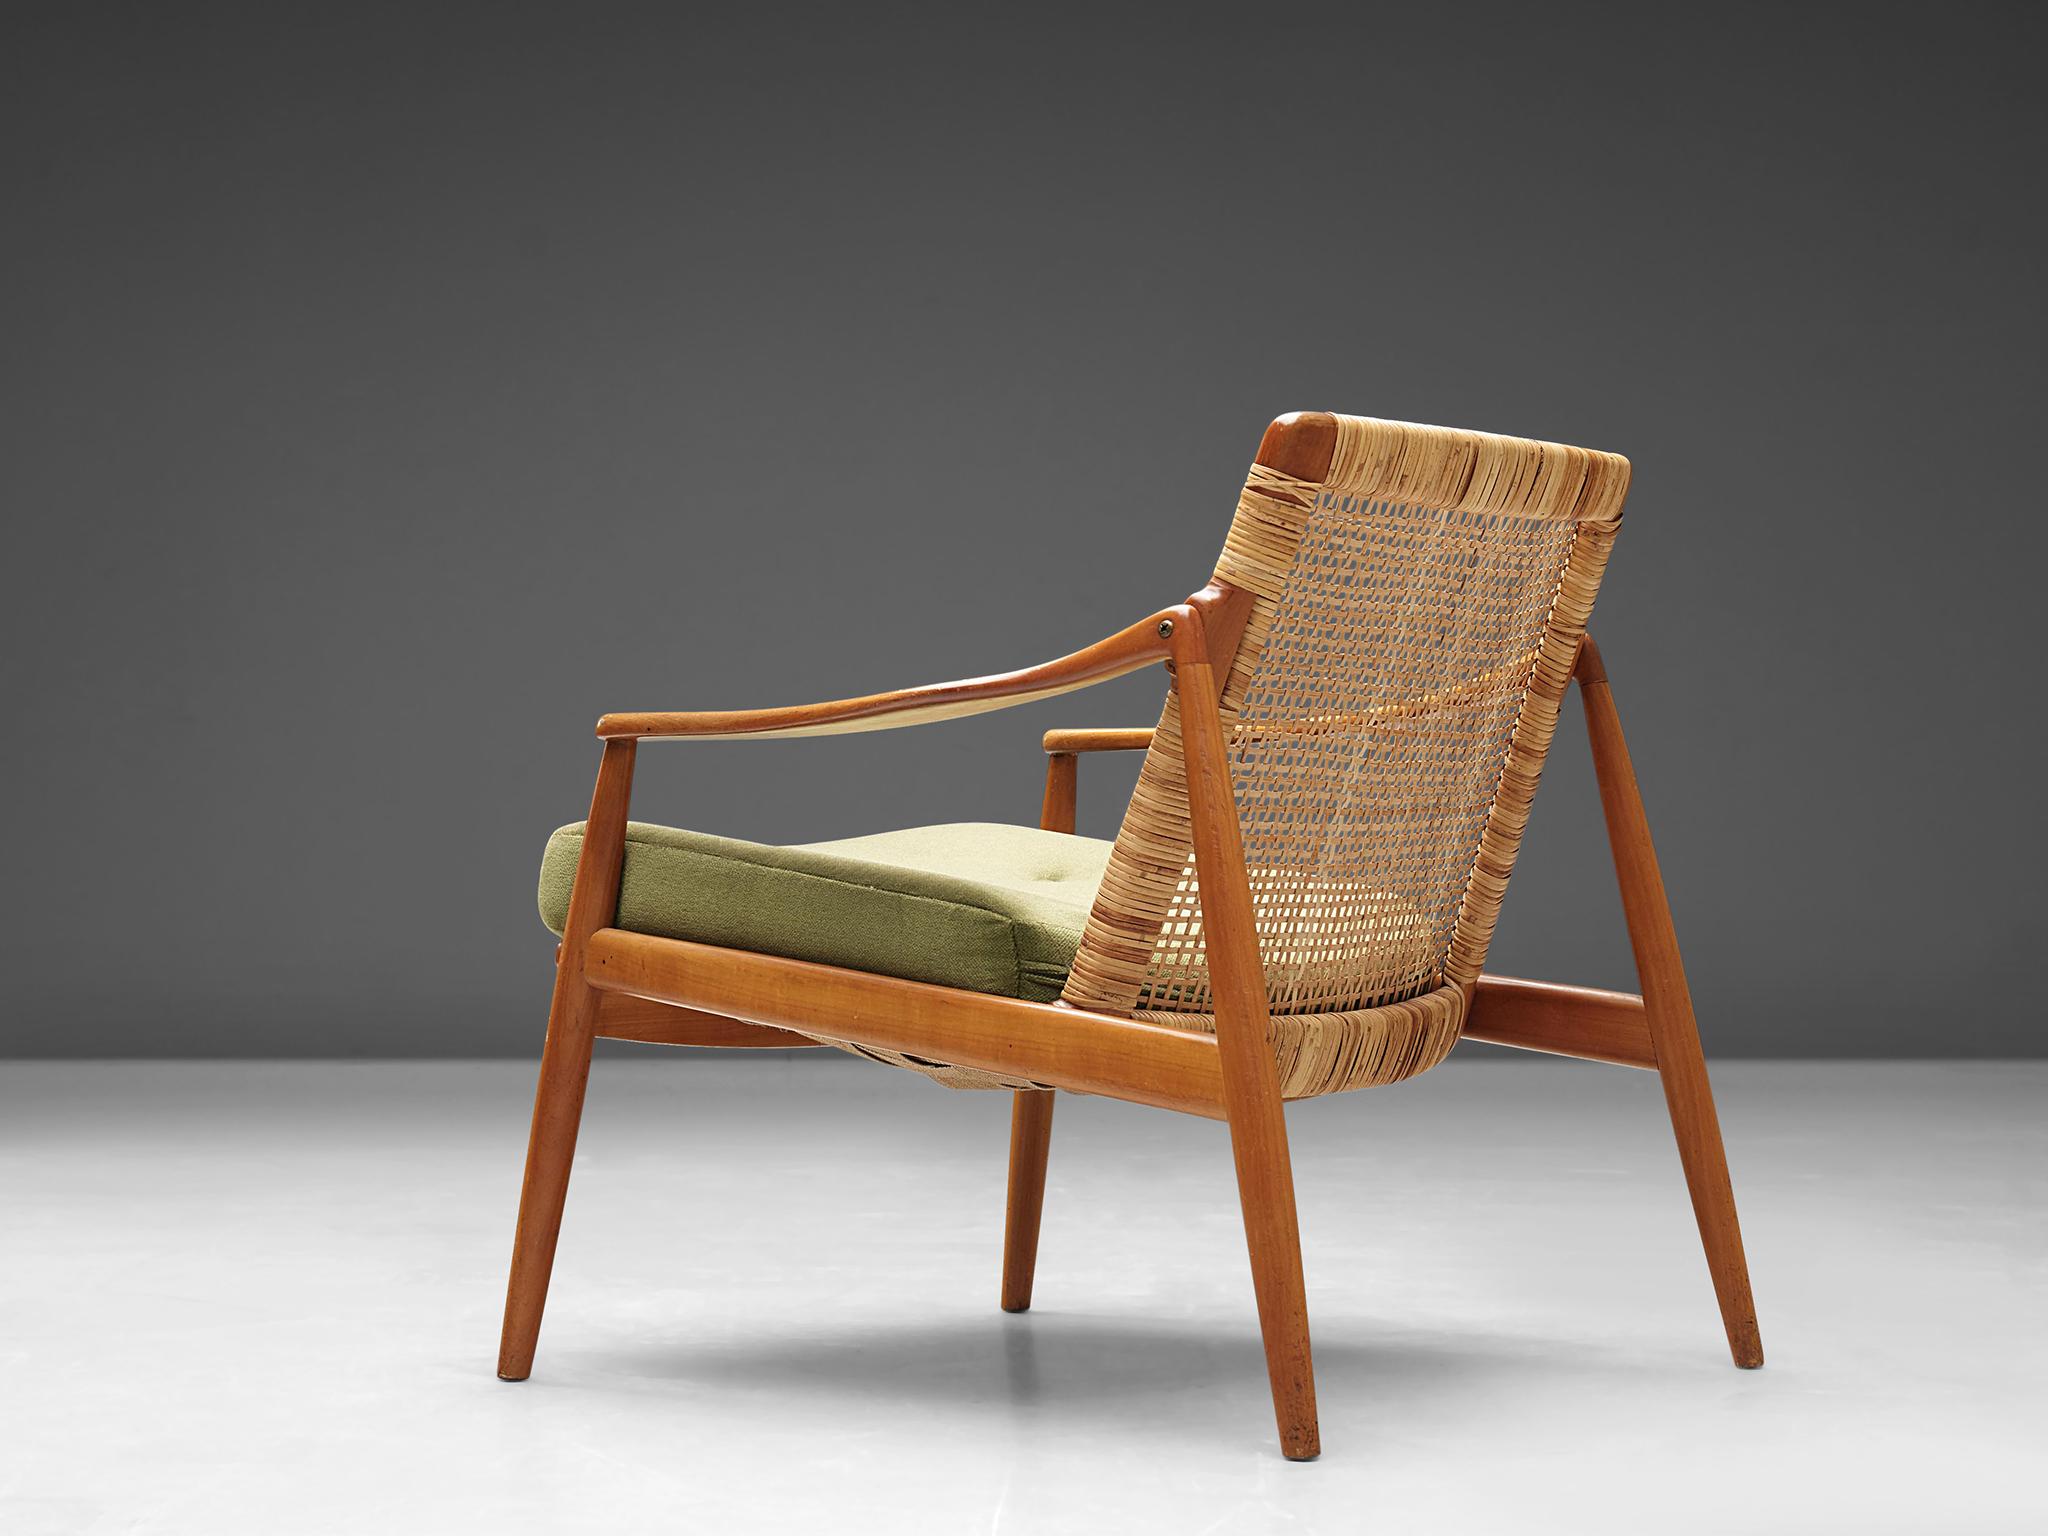 Hartmut Lohmeyer for Wilkhahn, 2 armchairs, green fabric, teak and rattan, Germany, 1956.

This lounge low armchair is sensuous and organically shaped. It features a slightly tilted back and is detailed with tapered legs. The softly bent armrests